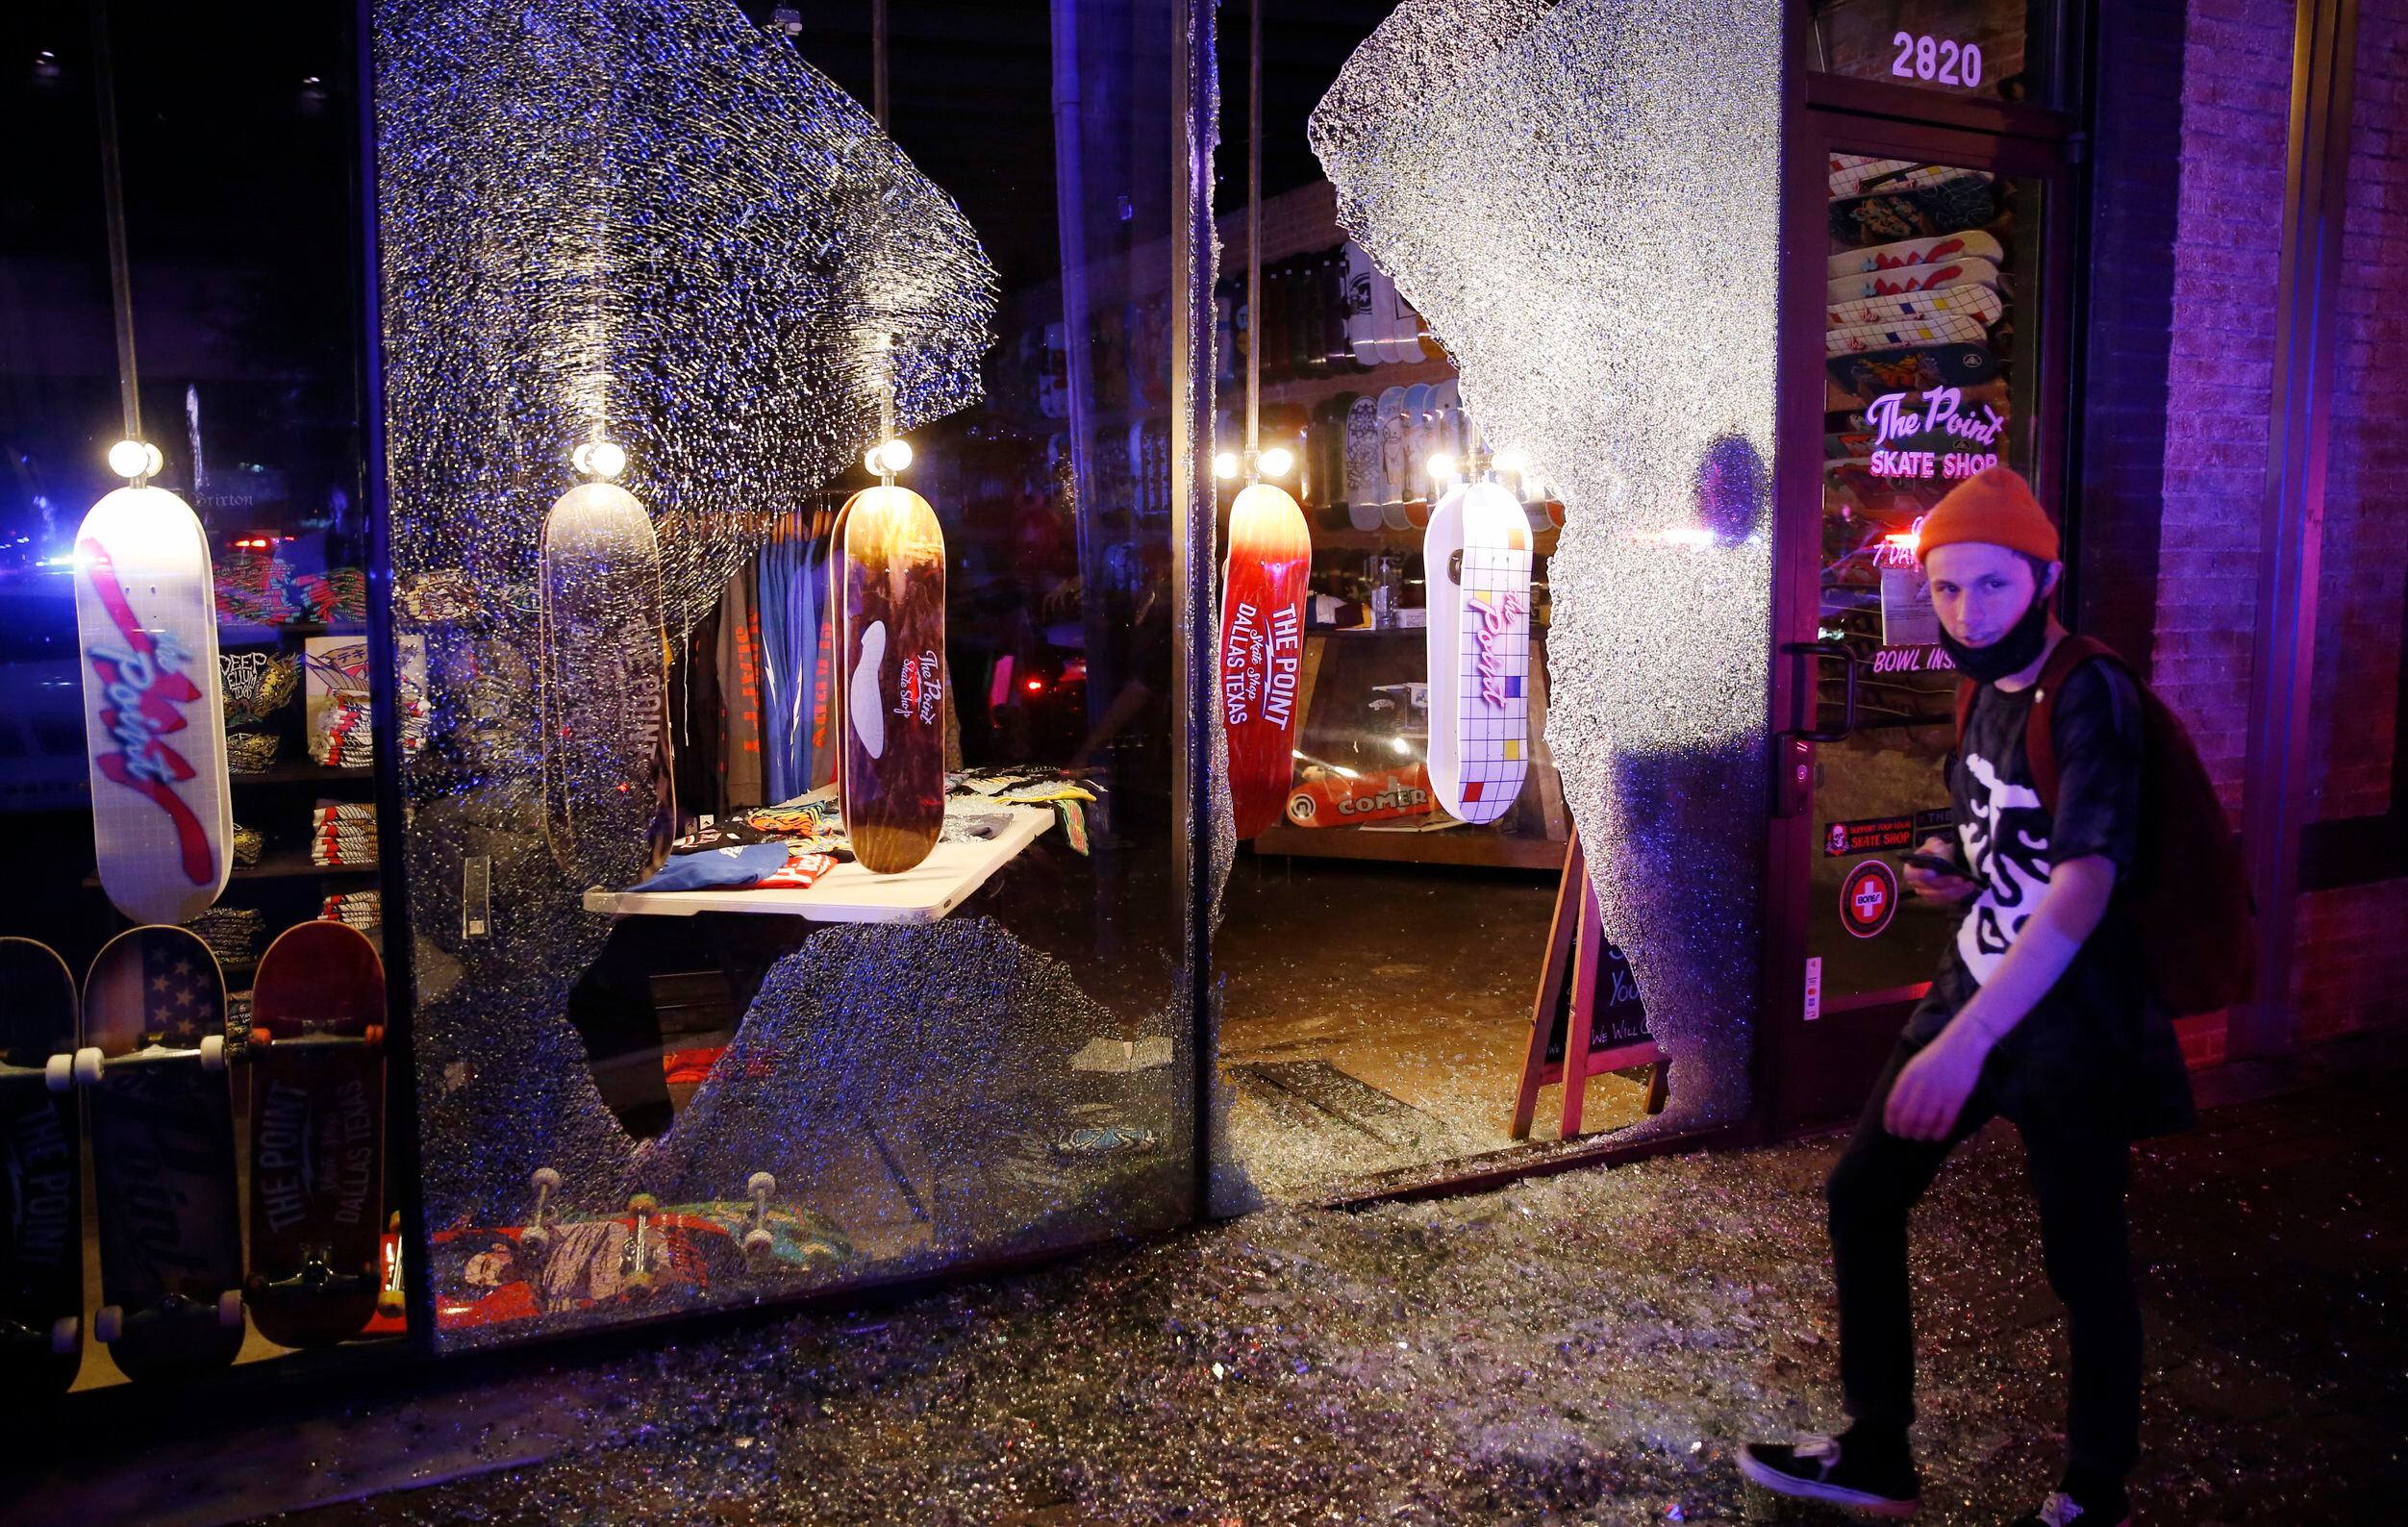 People walk by the busted window of The Point Skate Shop along Main Street in Deep Ellum in...